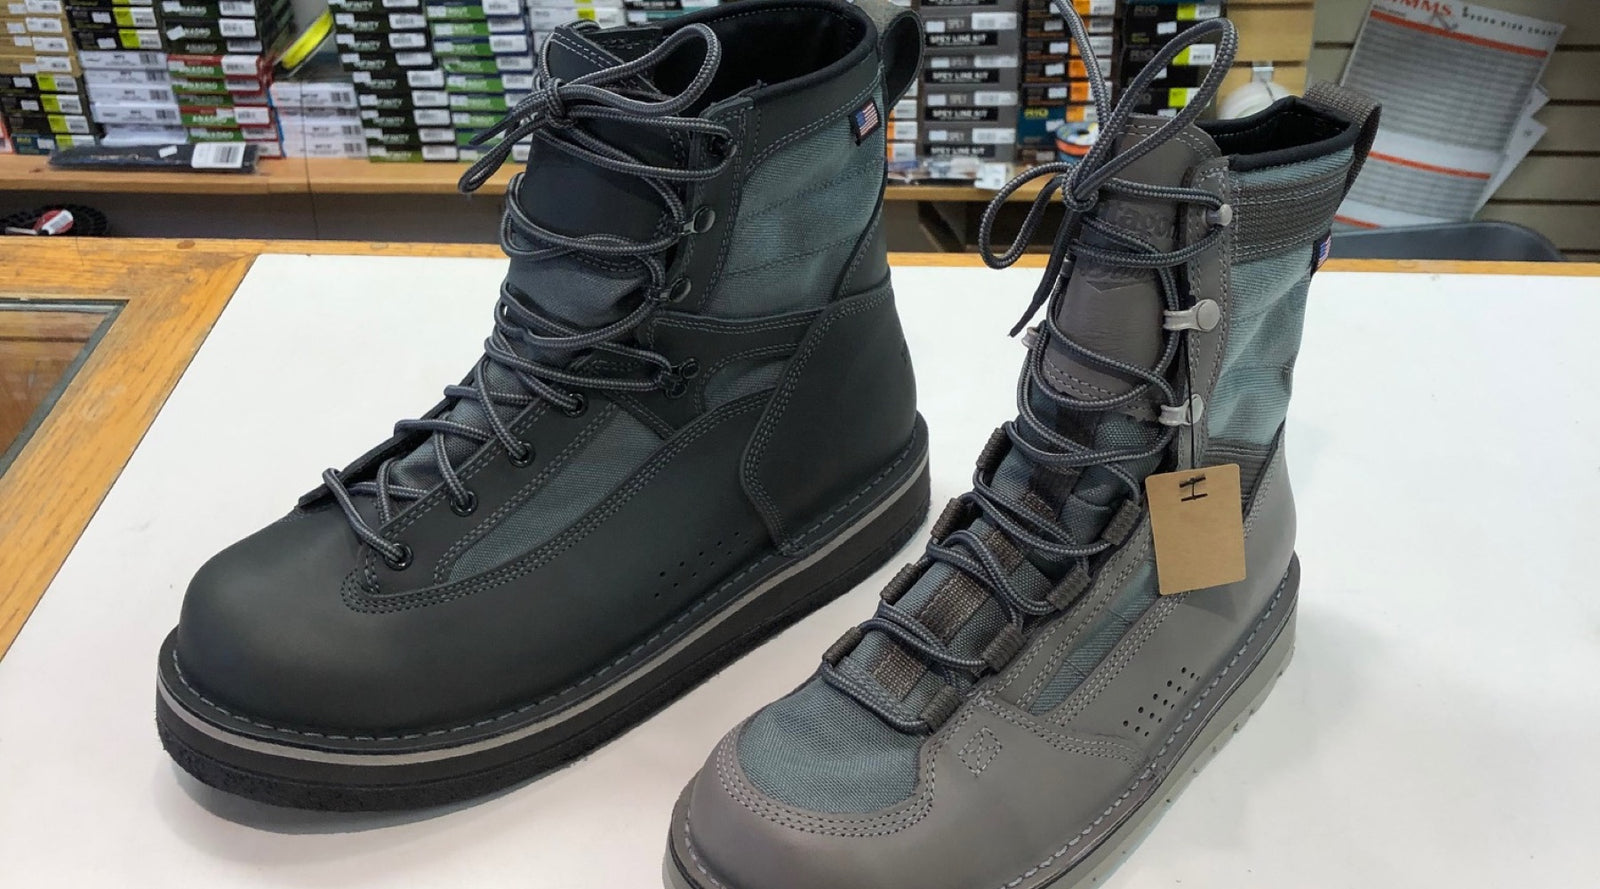 Gear Review: The Patagonia Danner Wading Boot - The Compleat